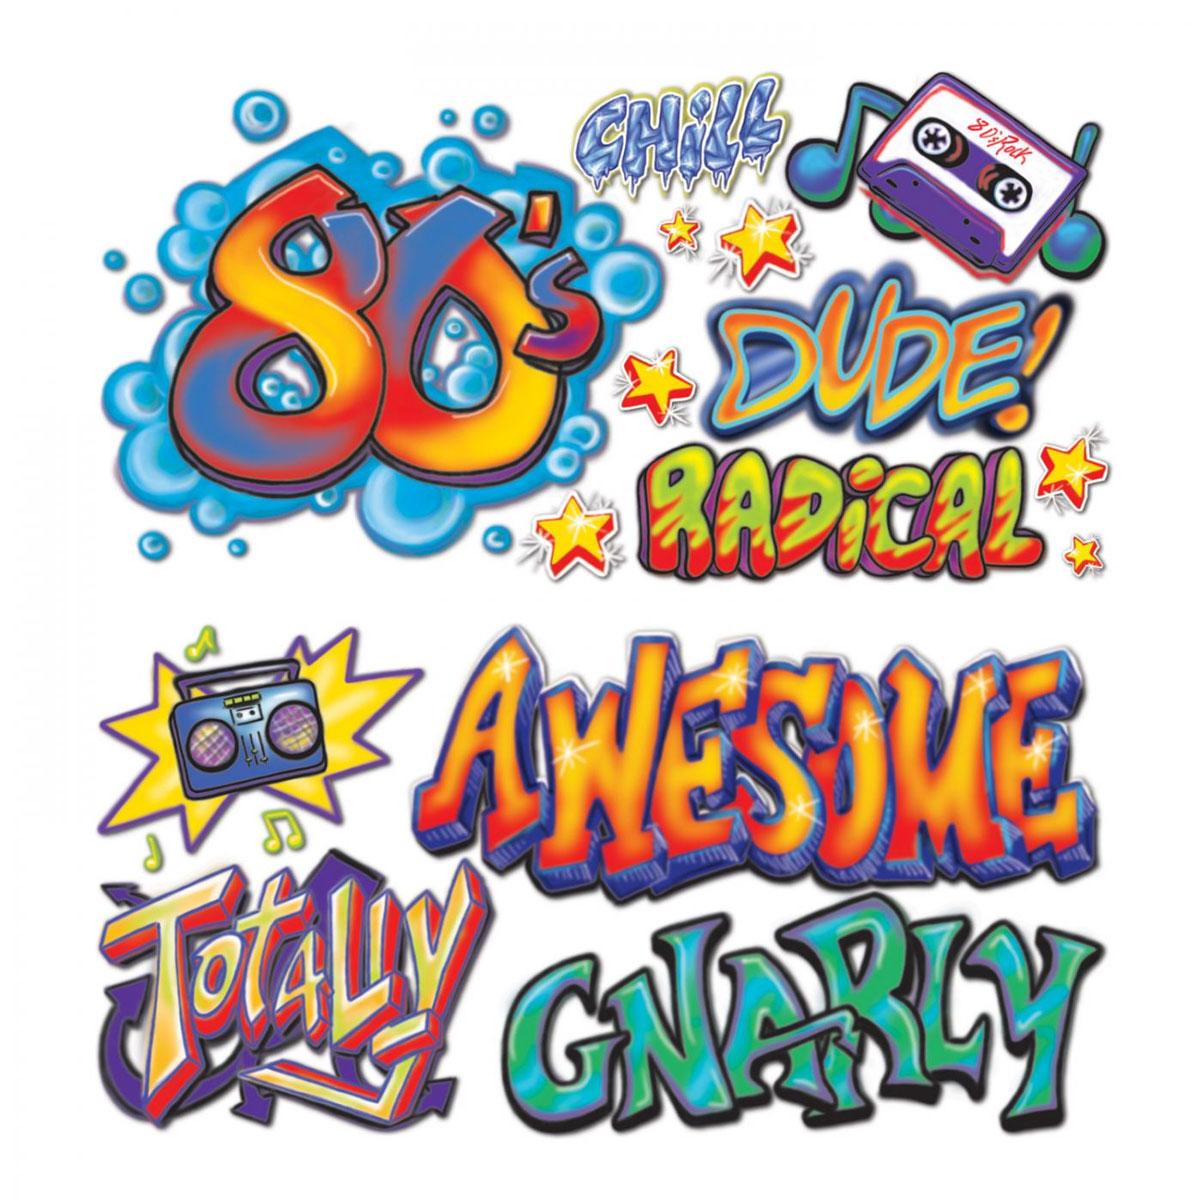 80's Graffiti Scene Setter Add Ons (15pcs) in sizes from 48" - 3.5" by Beistle 52070 available here at Karnival Costumes online party shop